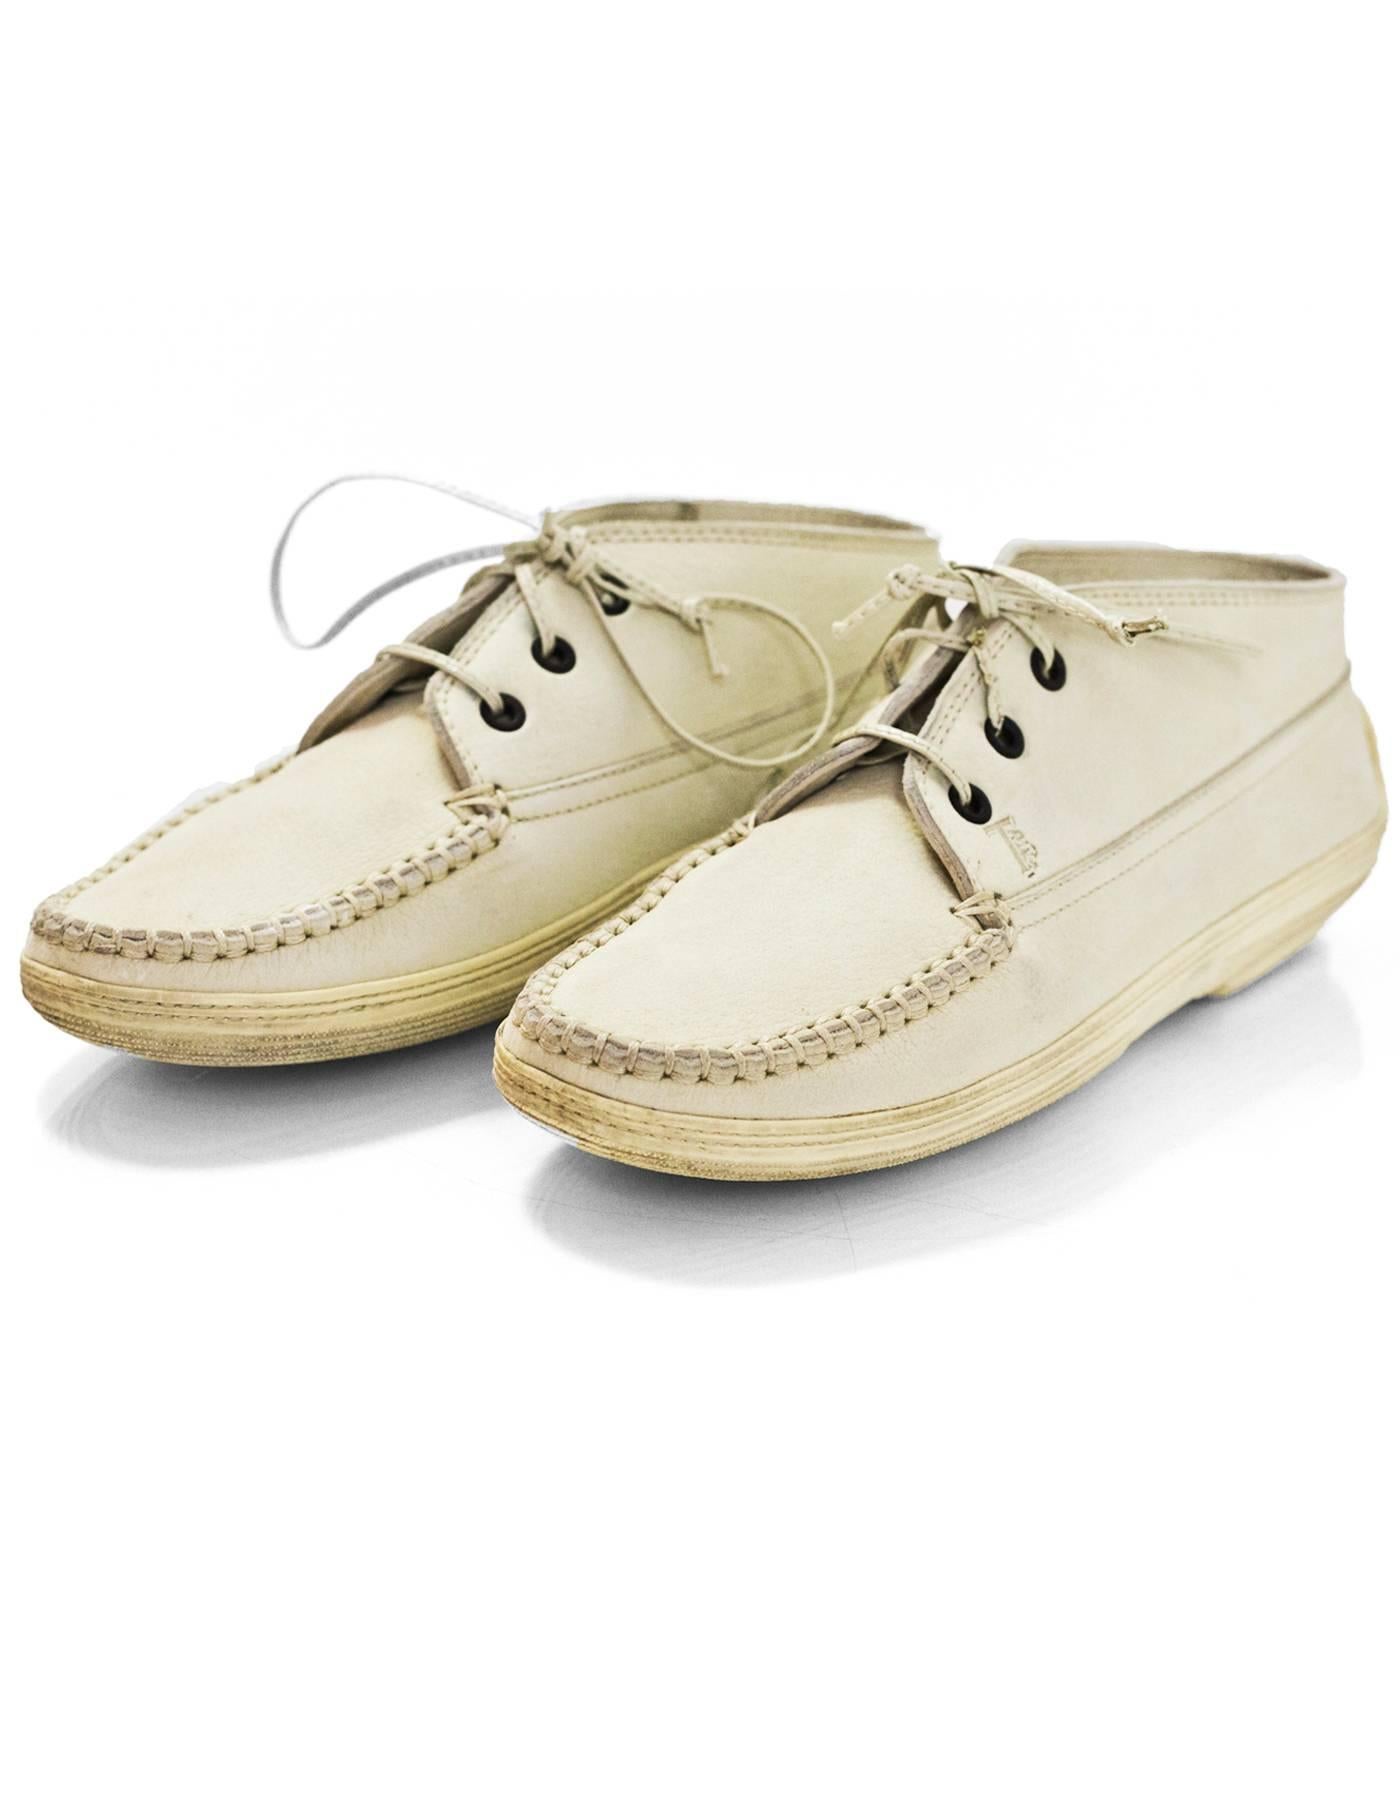 TOD's Cream Leather Lace-Up Loafers Sz 37.5

Made In: Italy
Color: Cream
Materials: Leather
Closure/Opening: Lace tie closure
Sole Stamp: TODS
Overall Condition: Excellent pre-owned condition with the exception of some light wear and discoloration